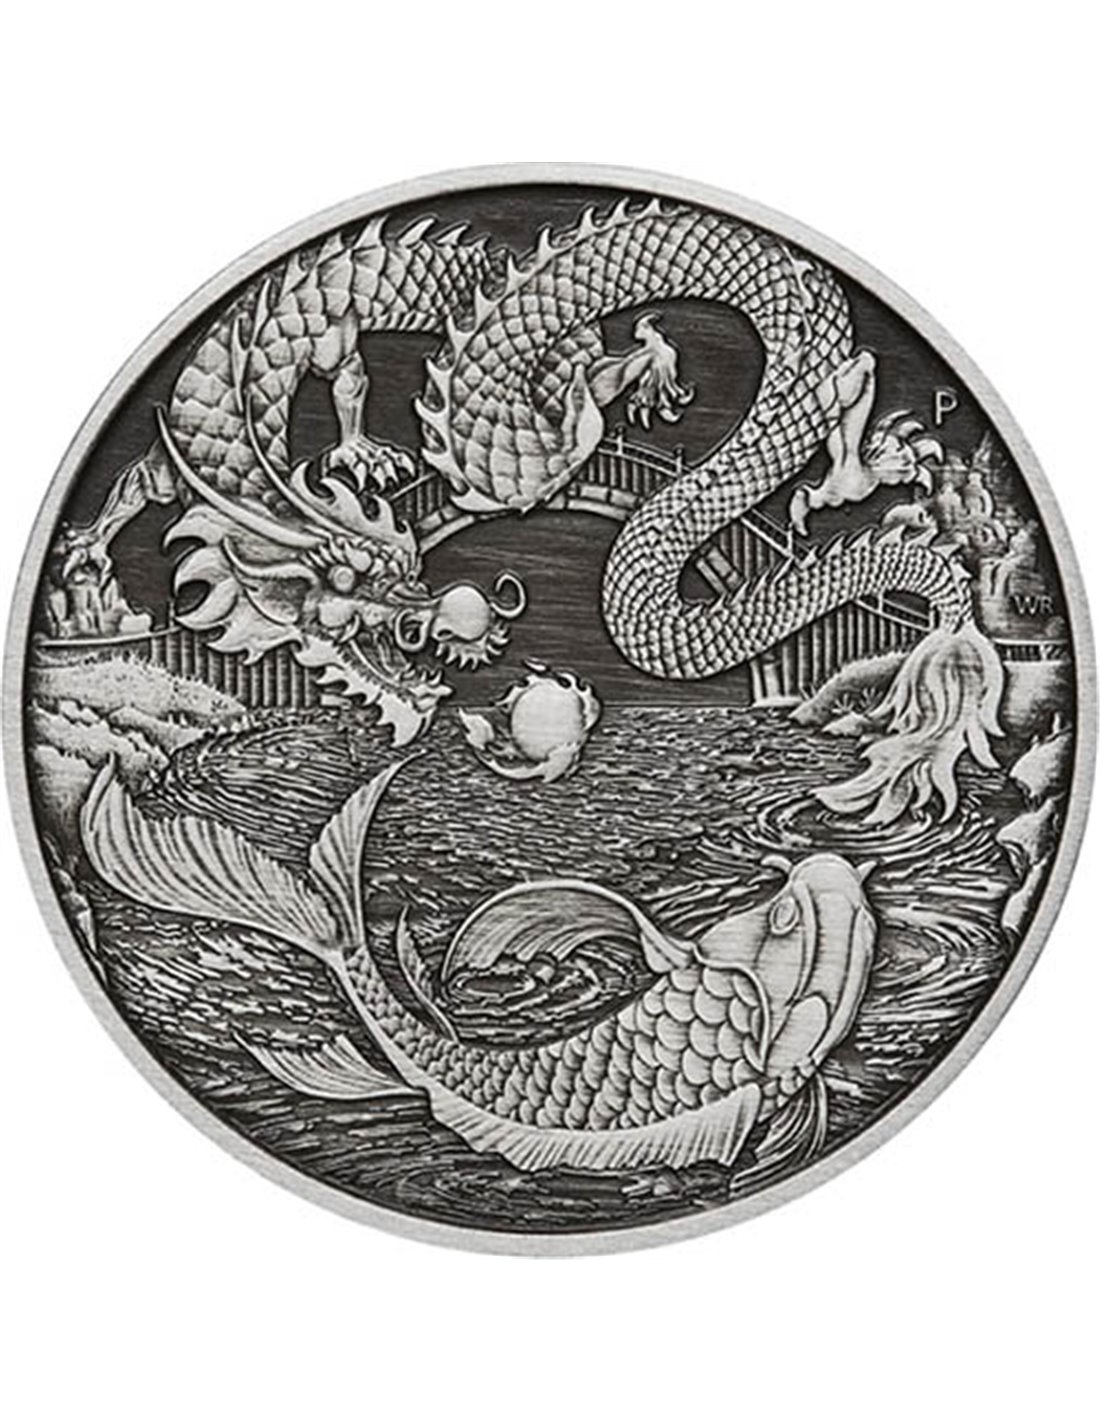 DRAGON AND KOI Myths & Legends Antique 1 Oz Silver Coin in Card 1$ 